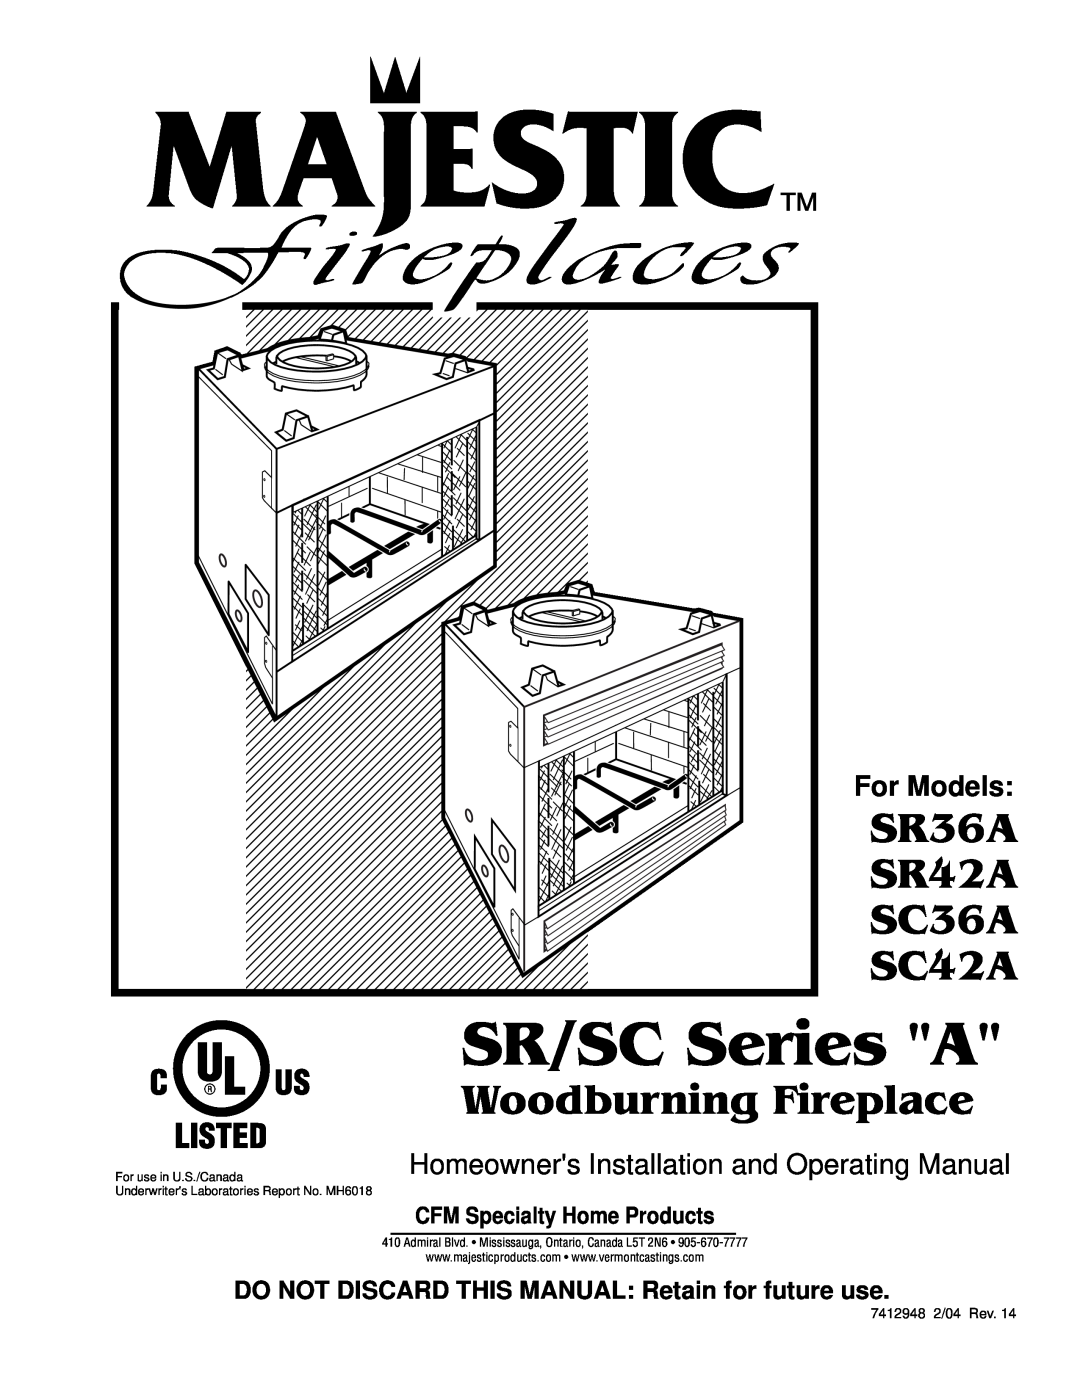 Majestic Appliances SC36A manual DO NOT DISCARD THIS MANUAL Retain for future use, CFM Specialty Home Products, SR36A 